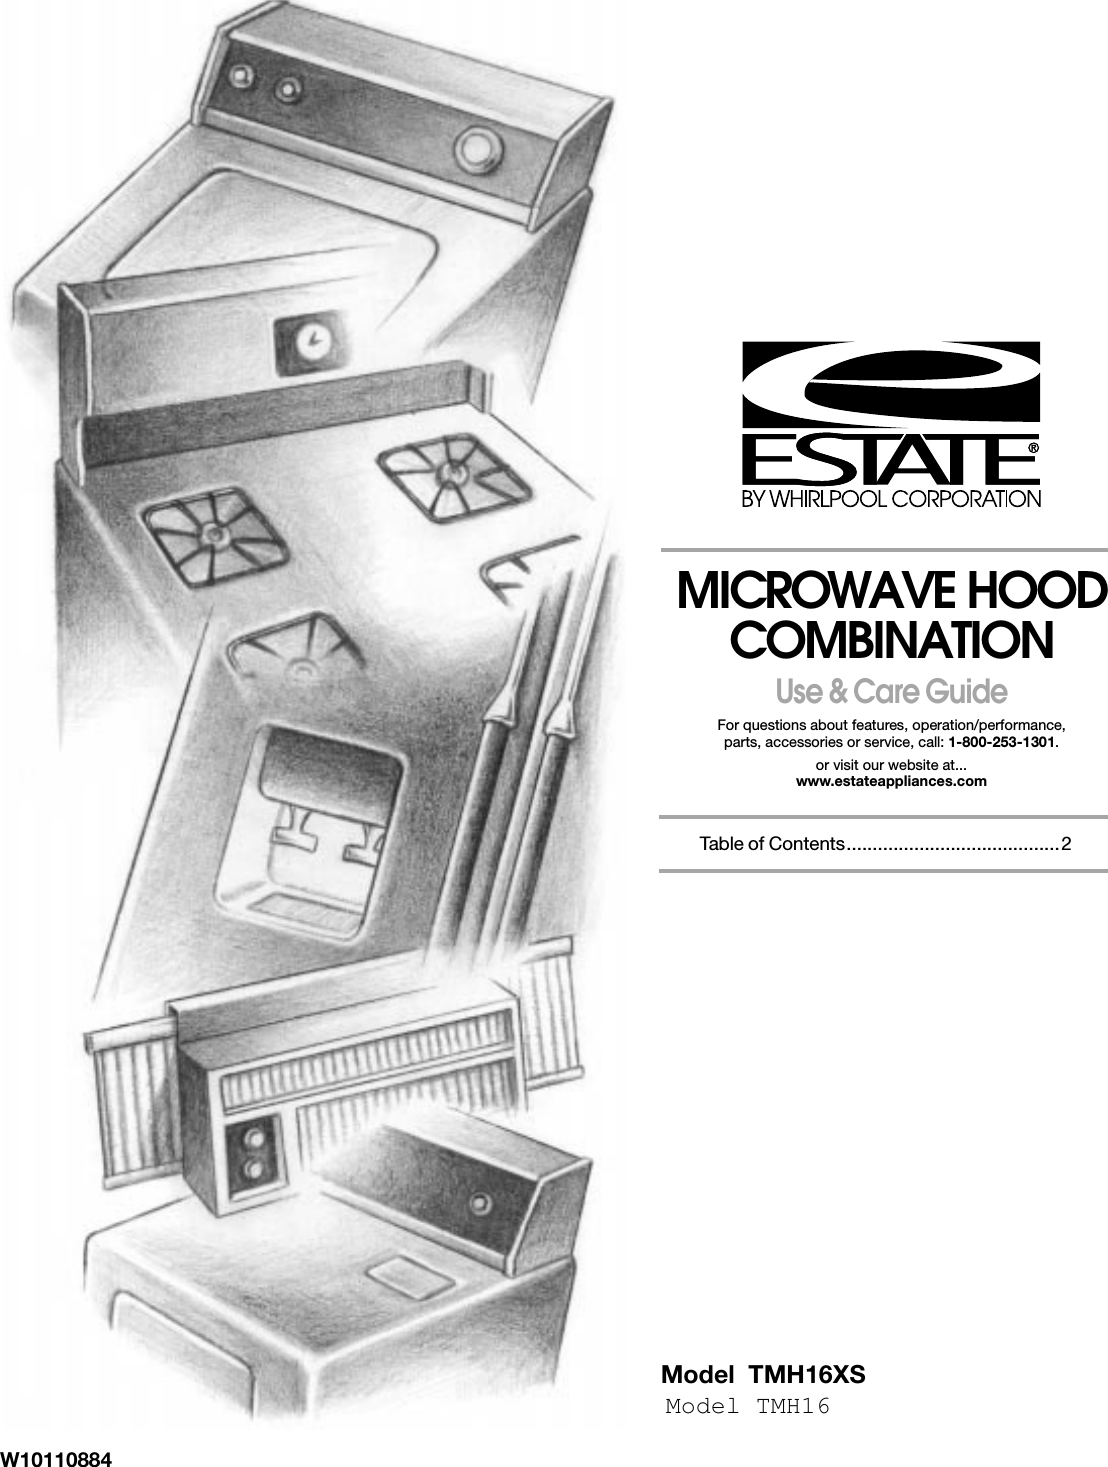 MICROWAVE HOOD COMBINATIONUse &amp; Care GuideFor questions about features, operation/performance,parts, accessories or service, call: 1-800-253-1301.or visit our website at...www.estateappliances.com    Table of Contents.........................................2W10110884Model  TMH16XSModel TMH16